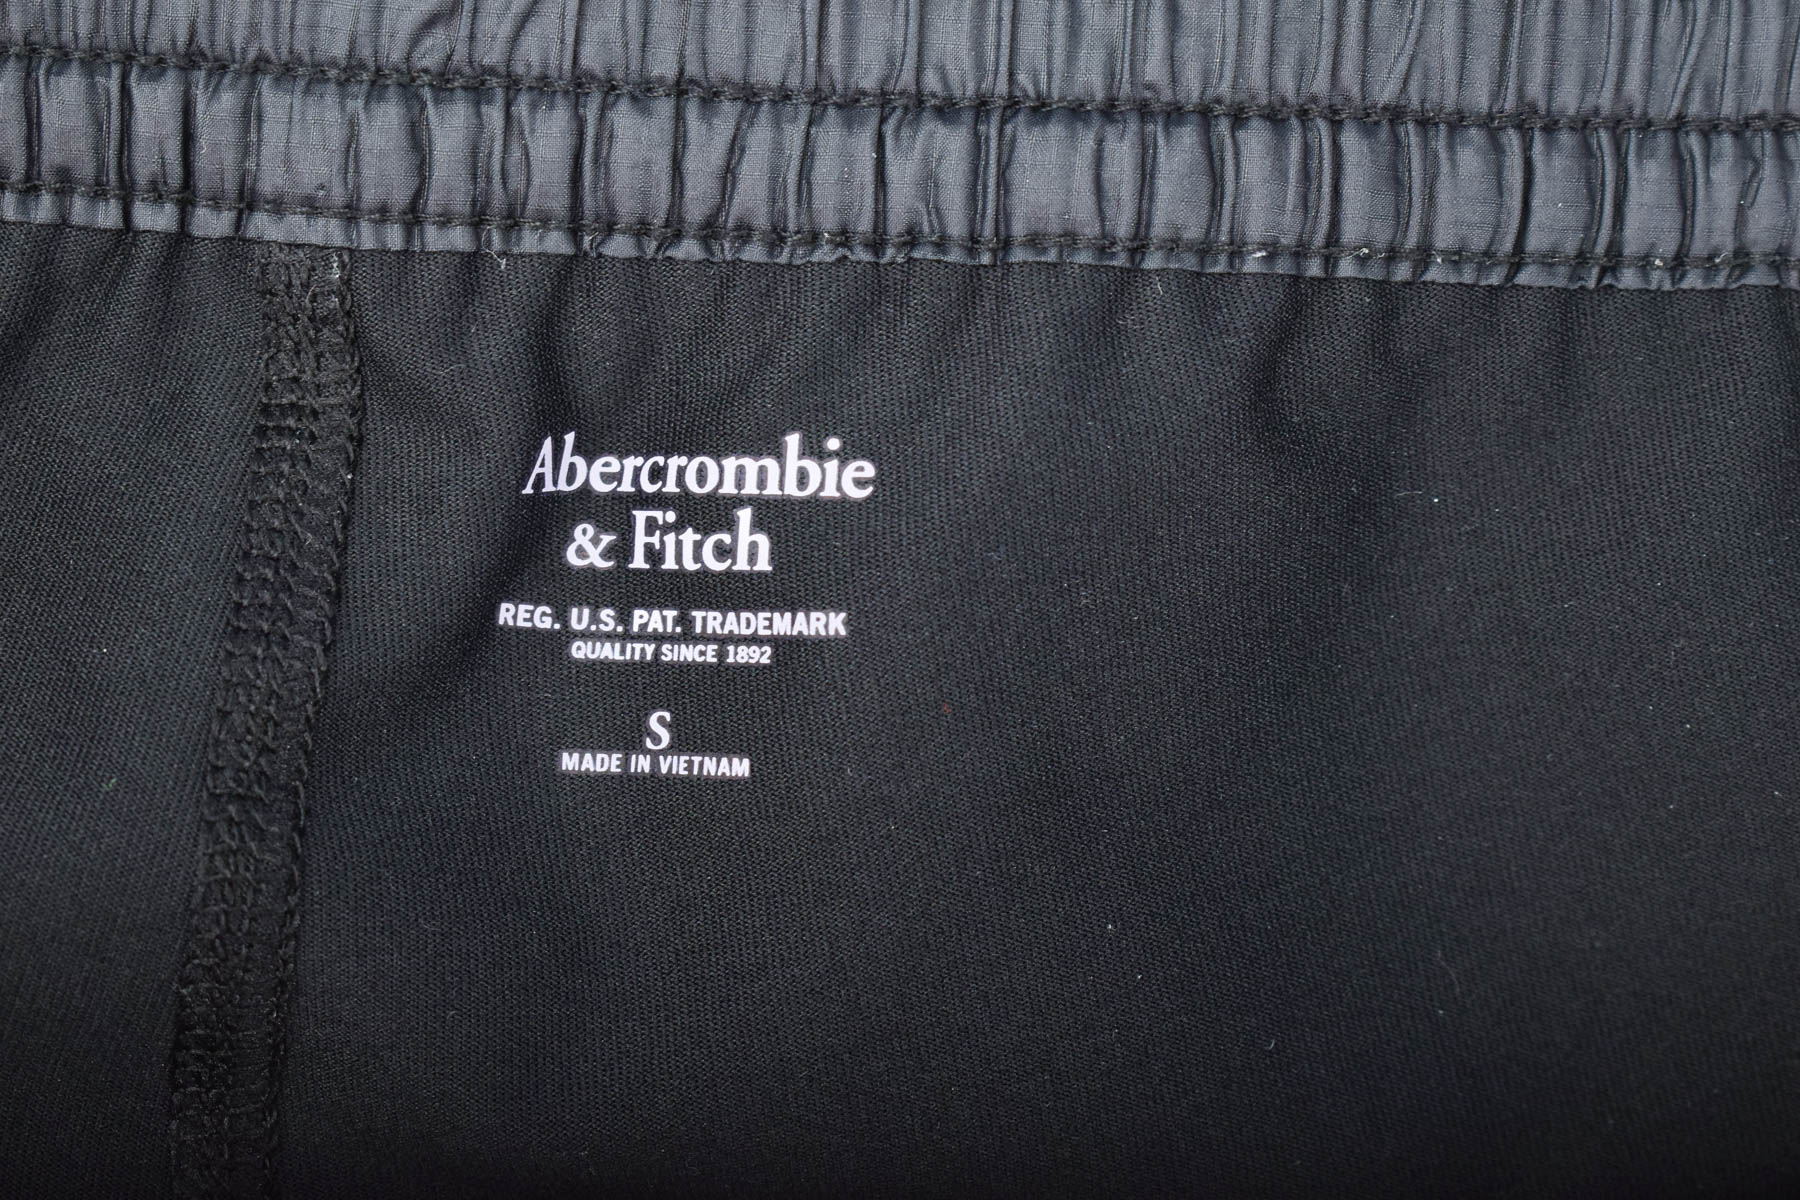 Women's shorts - Abercrombie & Fitch - 2